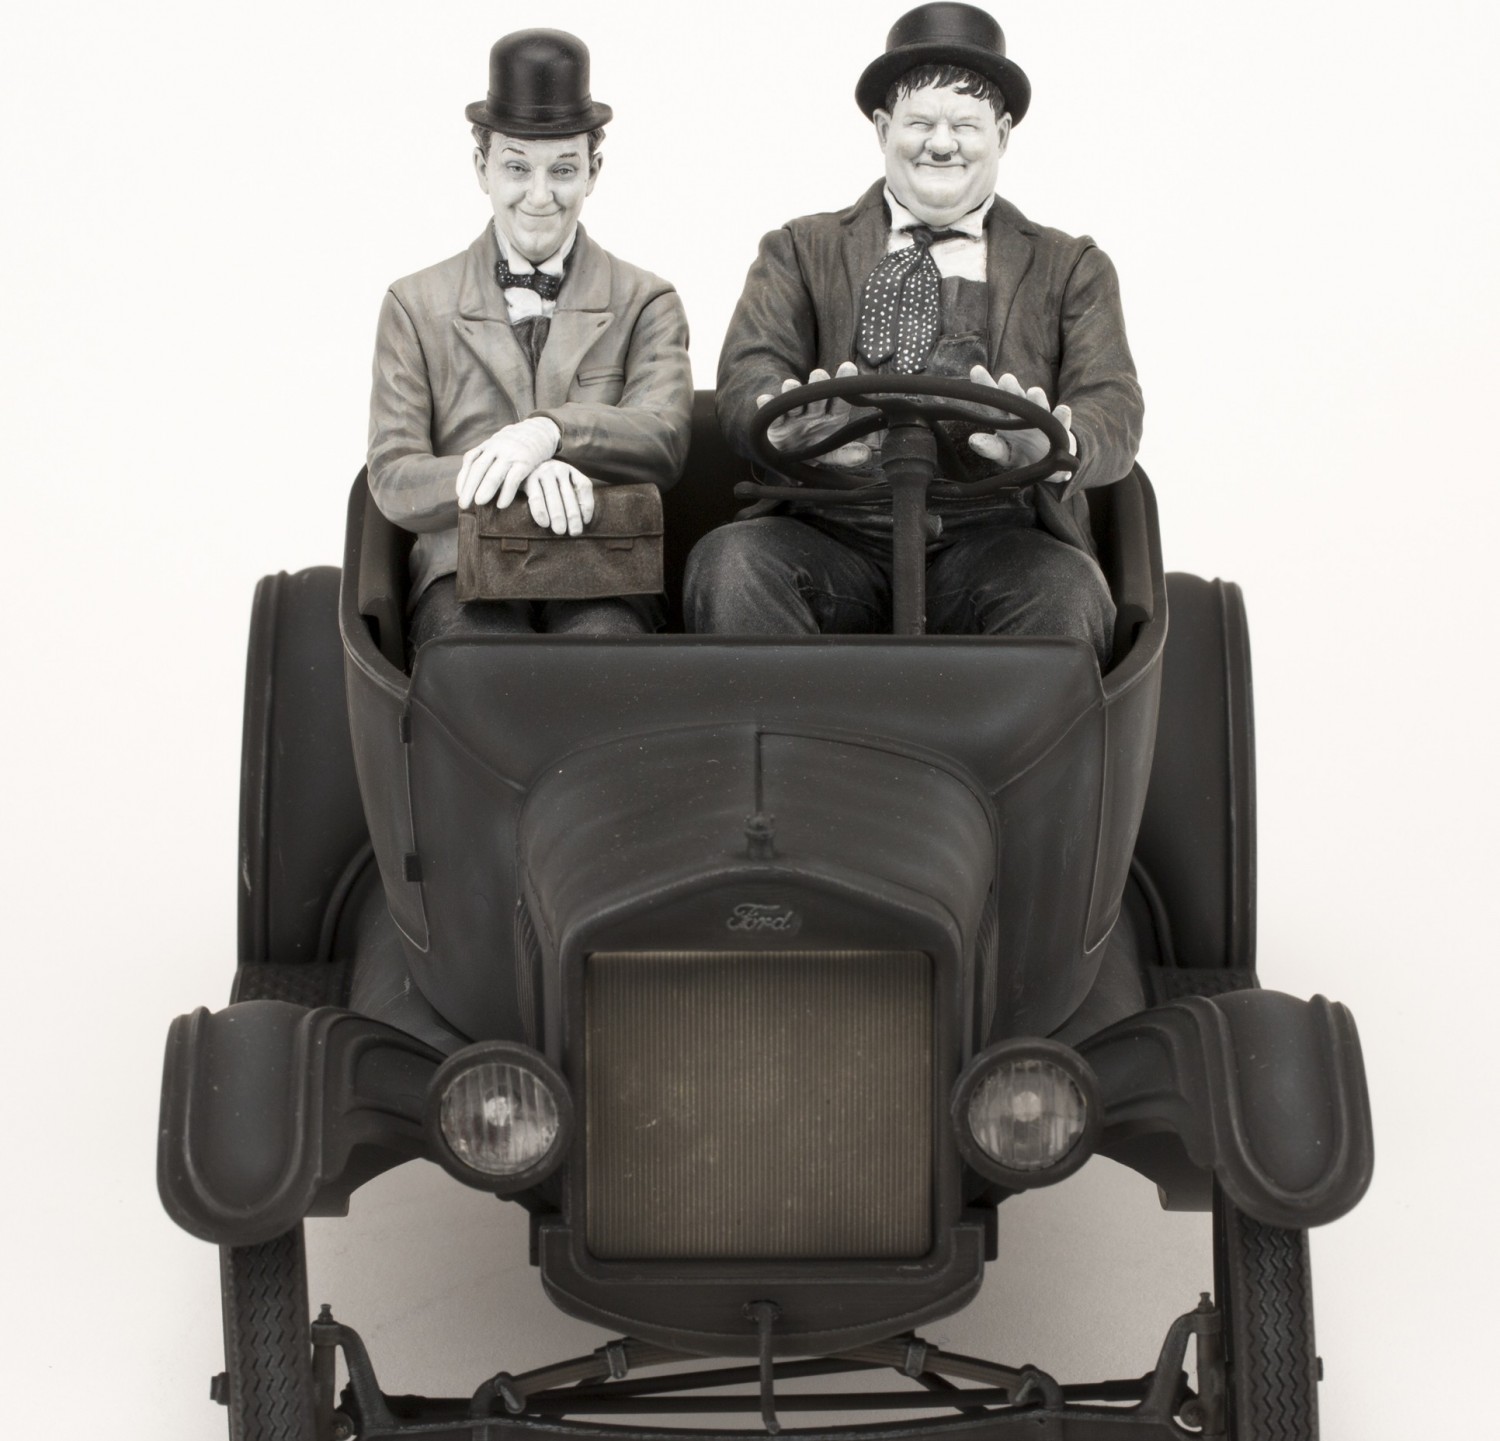 Laurel & Hardy on Ford Model T 1:12 scale resin statue - 20